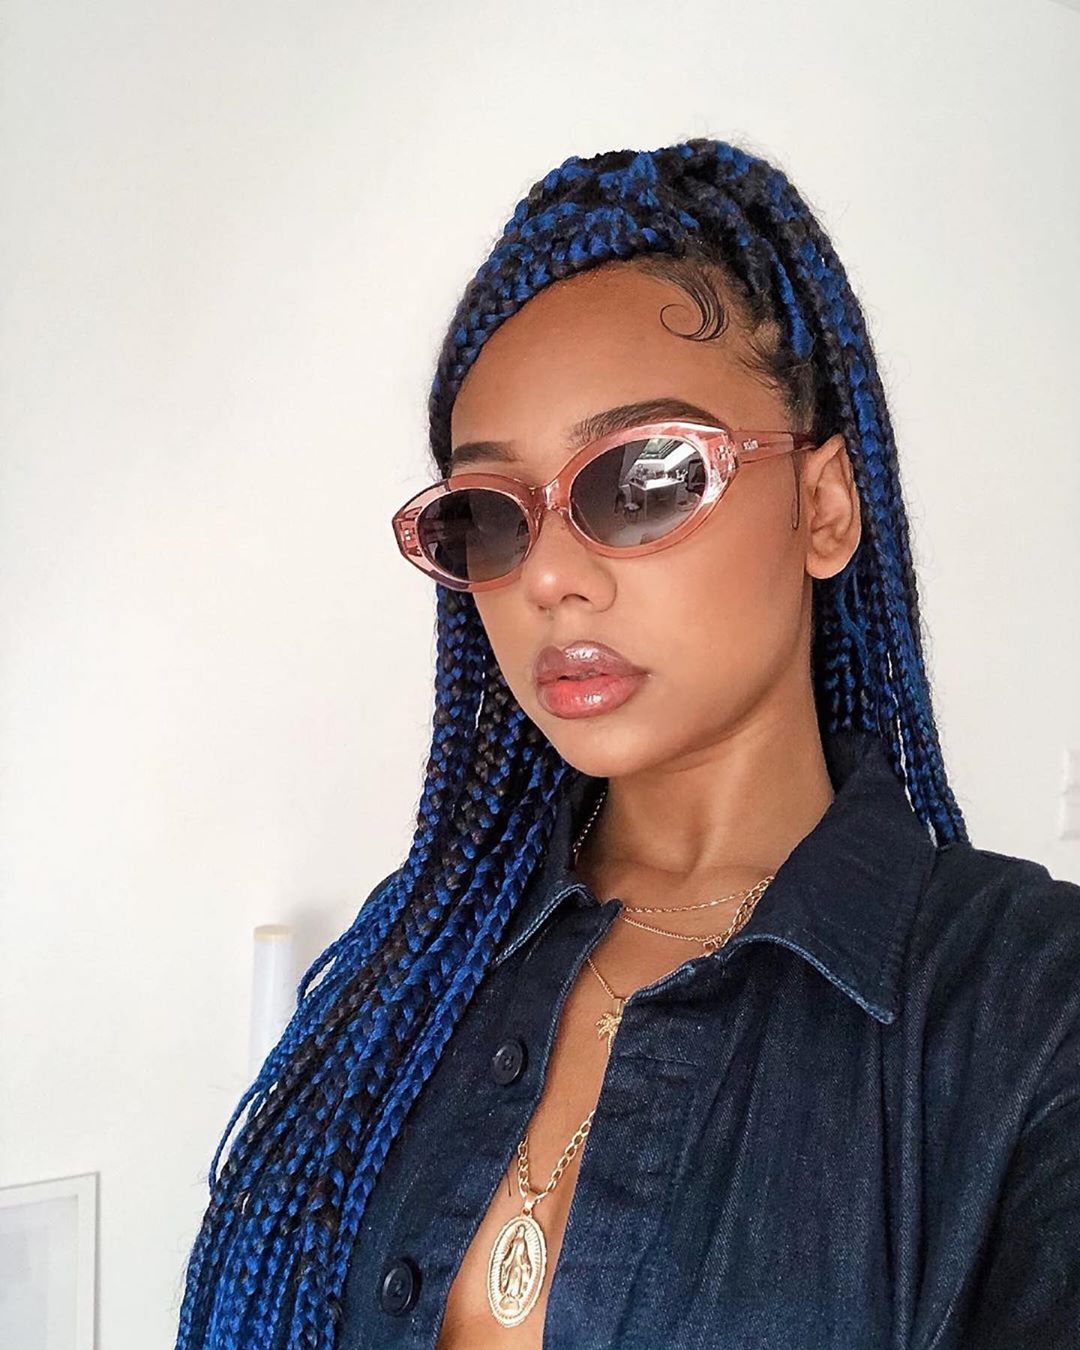 20 Hairstyle Photos from African Braids to Inspire You